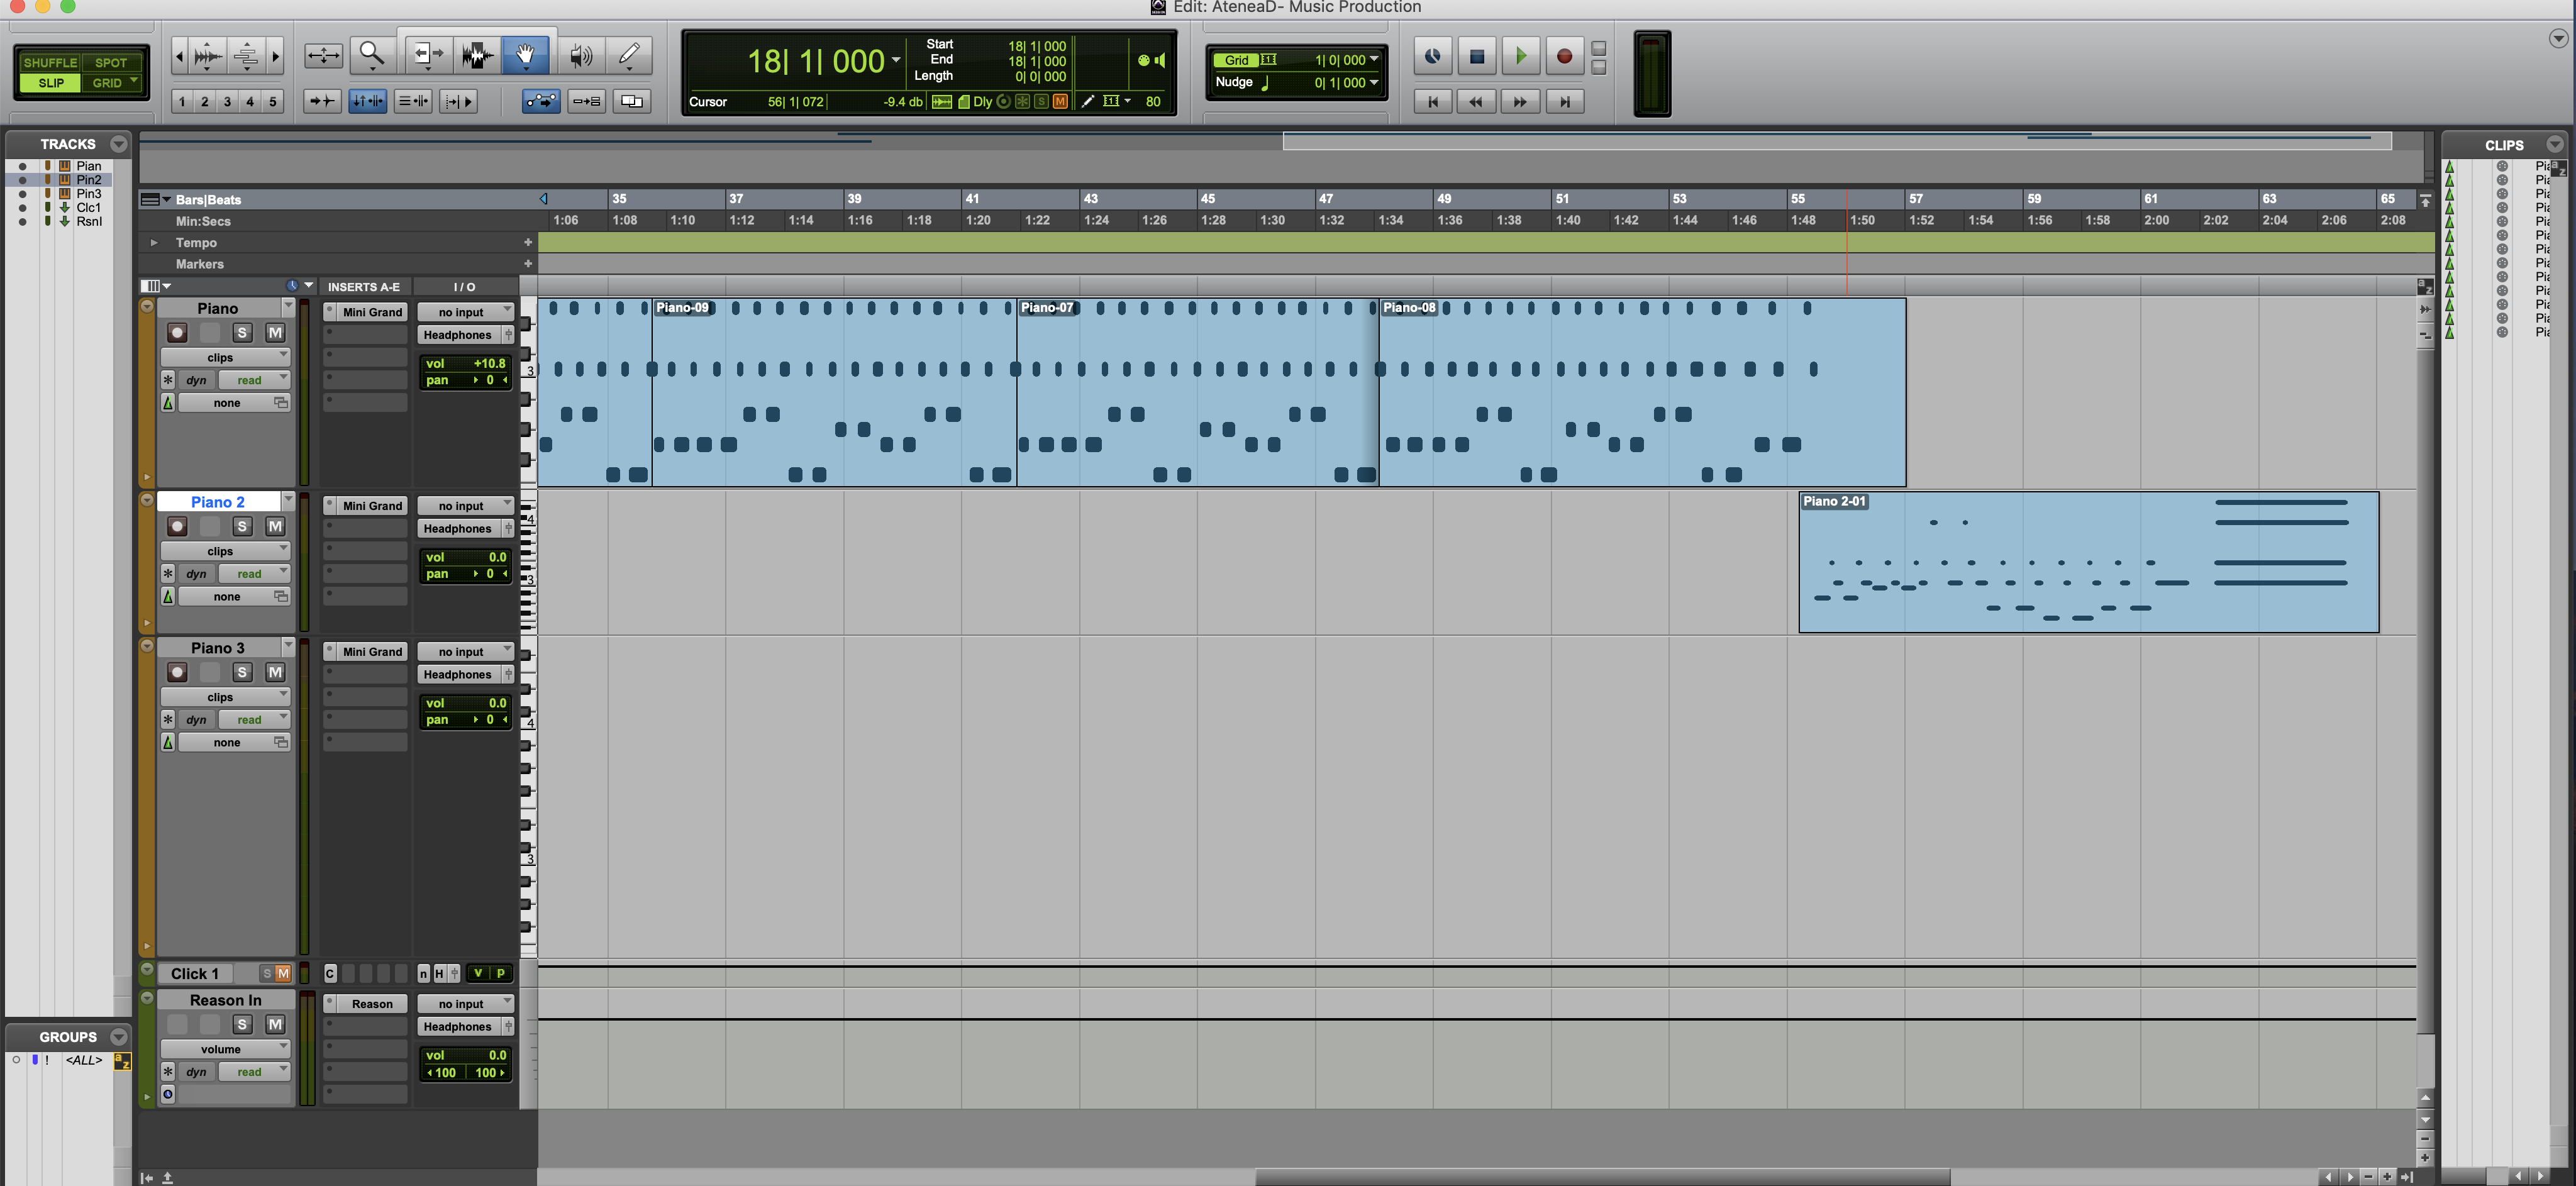 This is another screenshot of the Pro Tools interface.